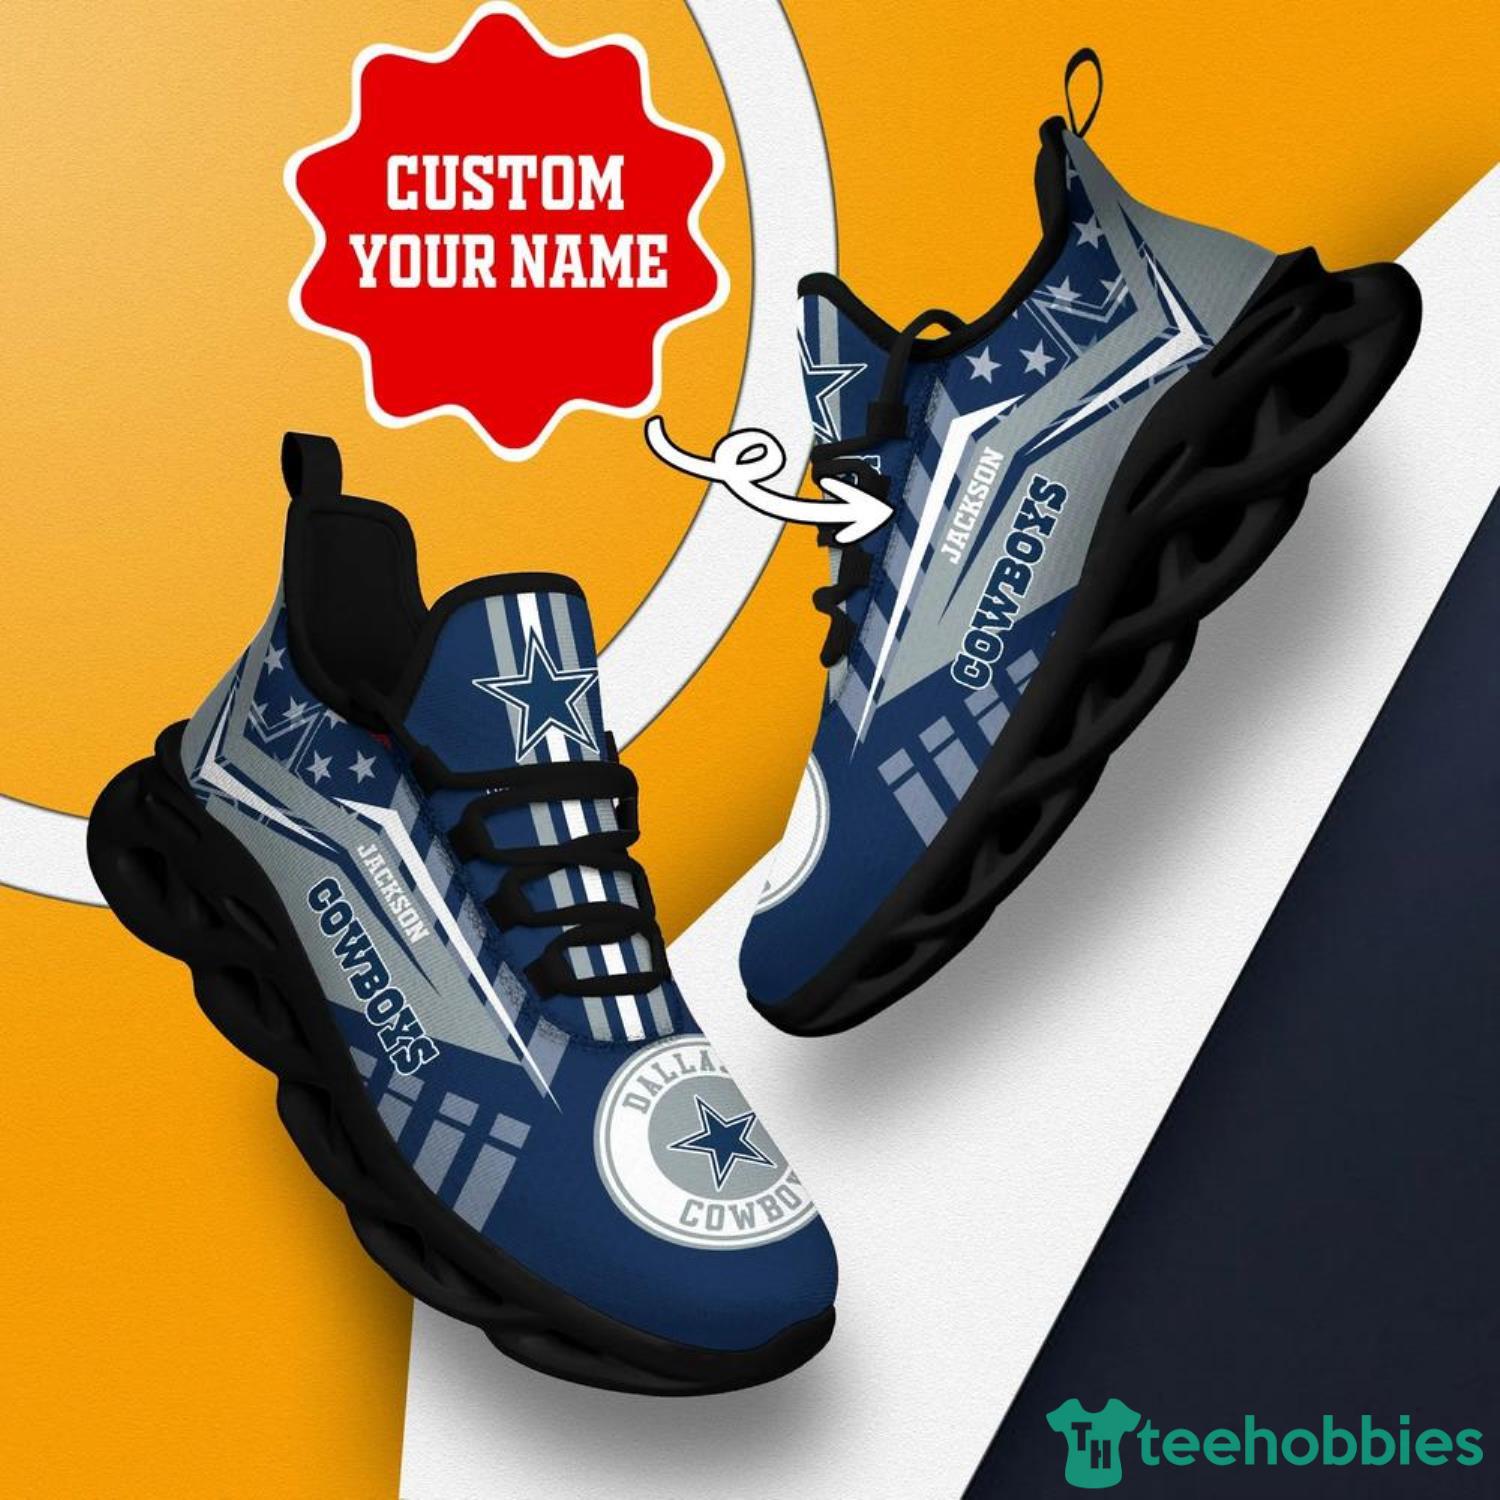 Nfl Dallas Cowboys Custom Name Max Soul Shoes Chunky Sneakers